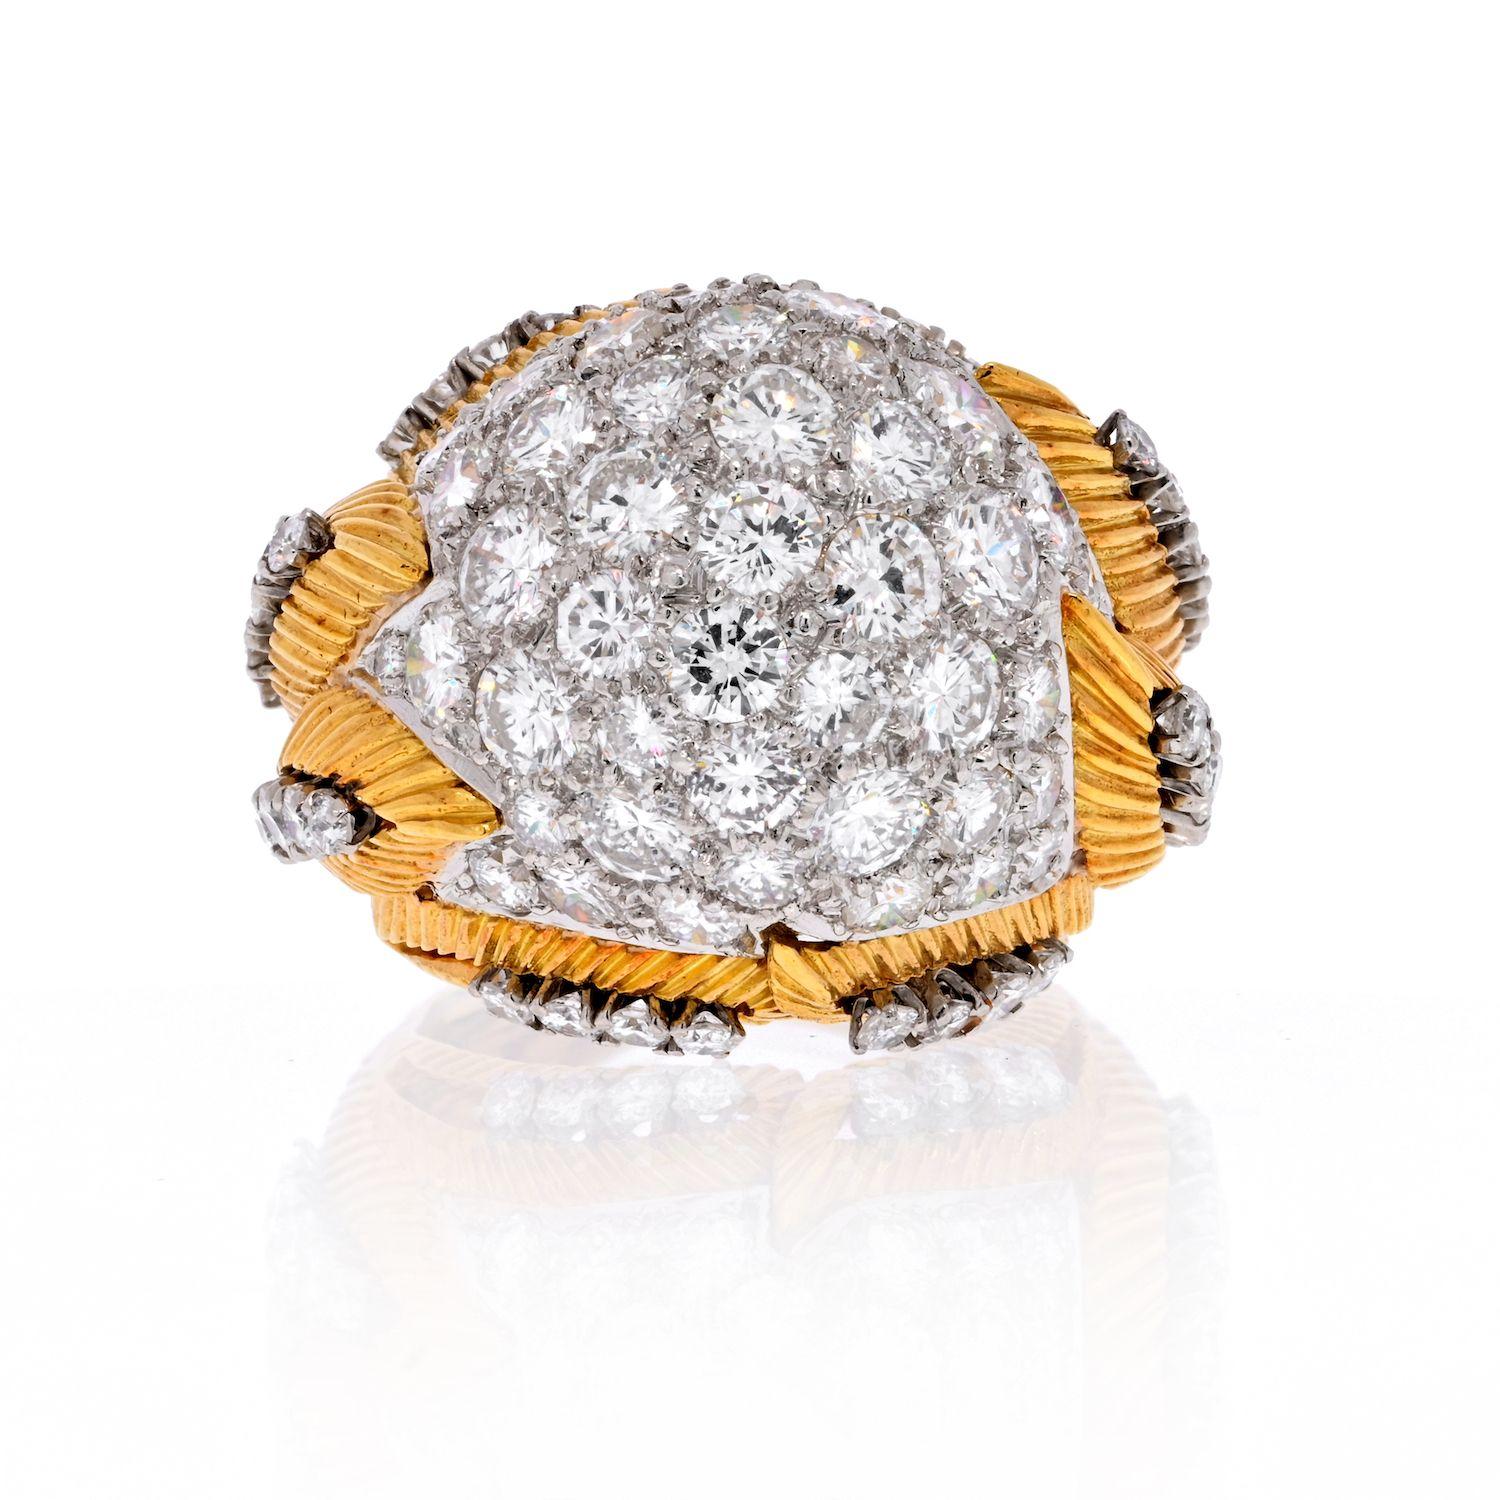 Diamond dome ring in platinum and yellow gold crafted with 8.50cts in round cut high quality diamonds, that are framed a top a textured gold shank. The setting is further decorated with fluted texture and round cut accent diamonds. 
Total carat